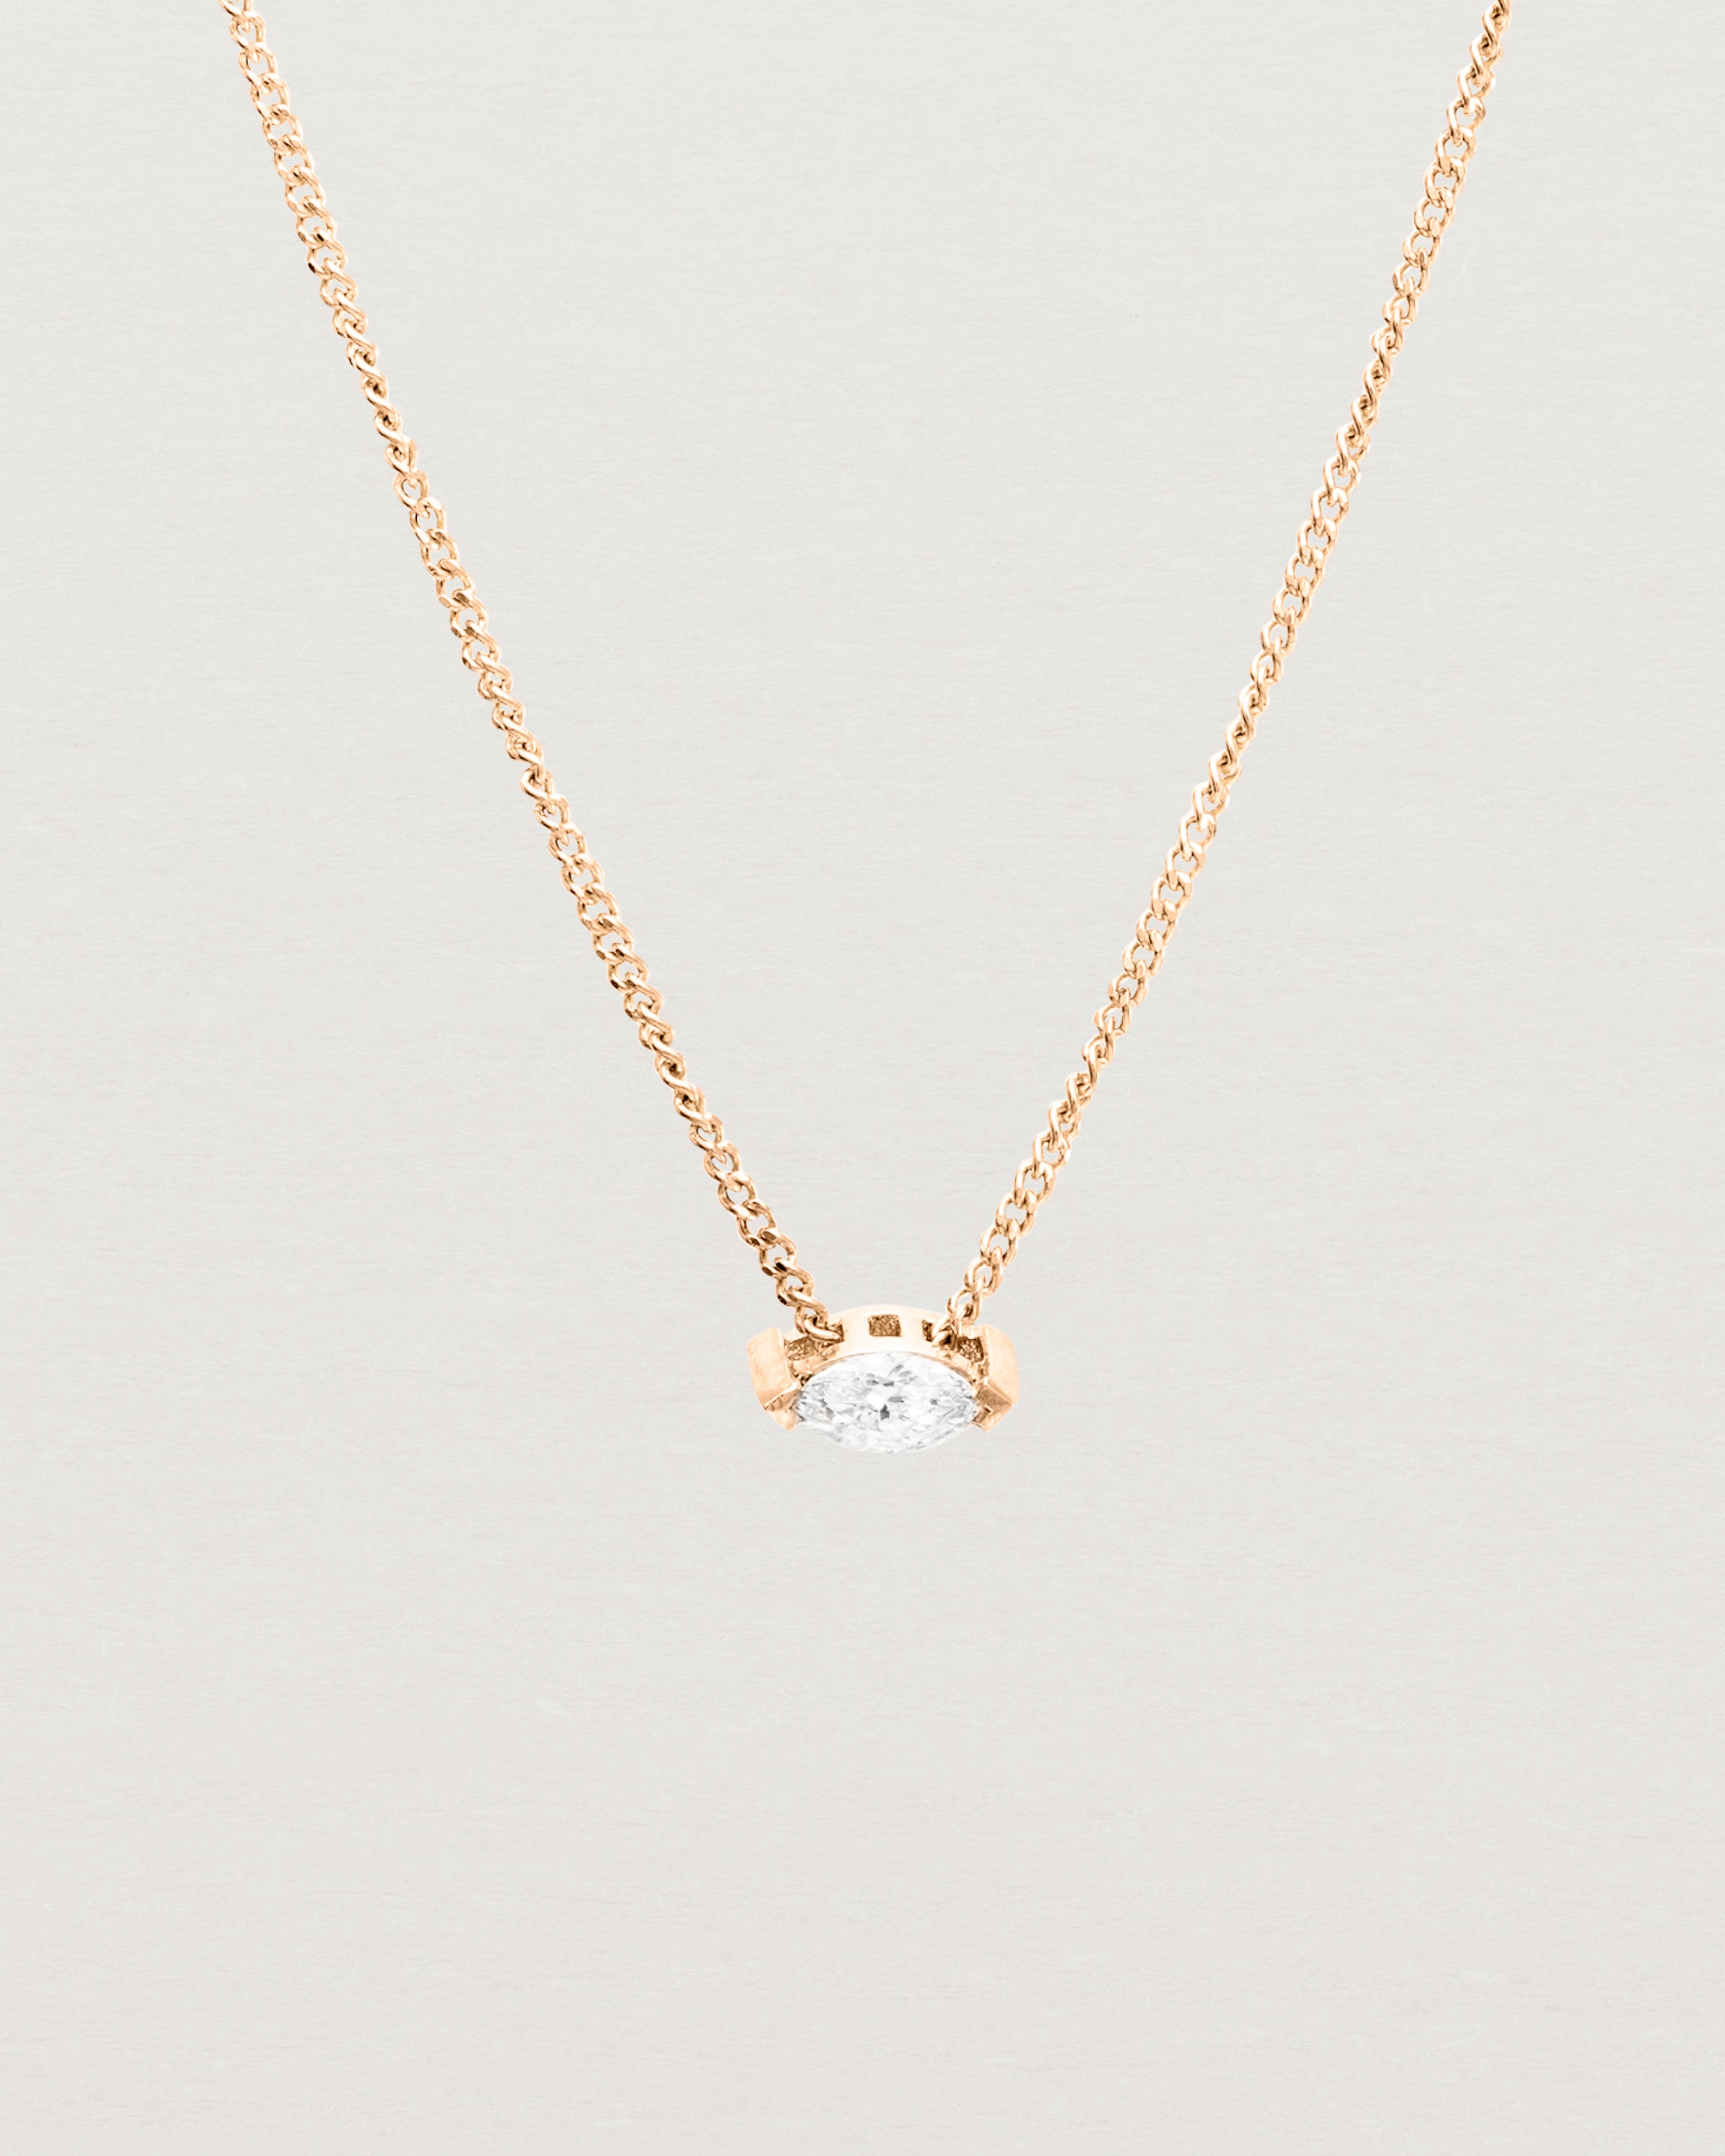 Close up view of the Vega Slider Necklace | Diamond | Rose Gold.